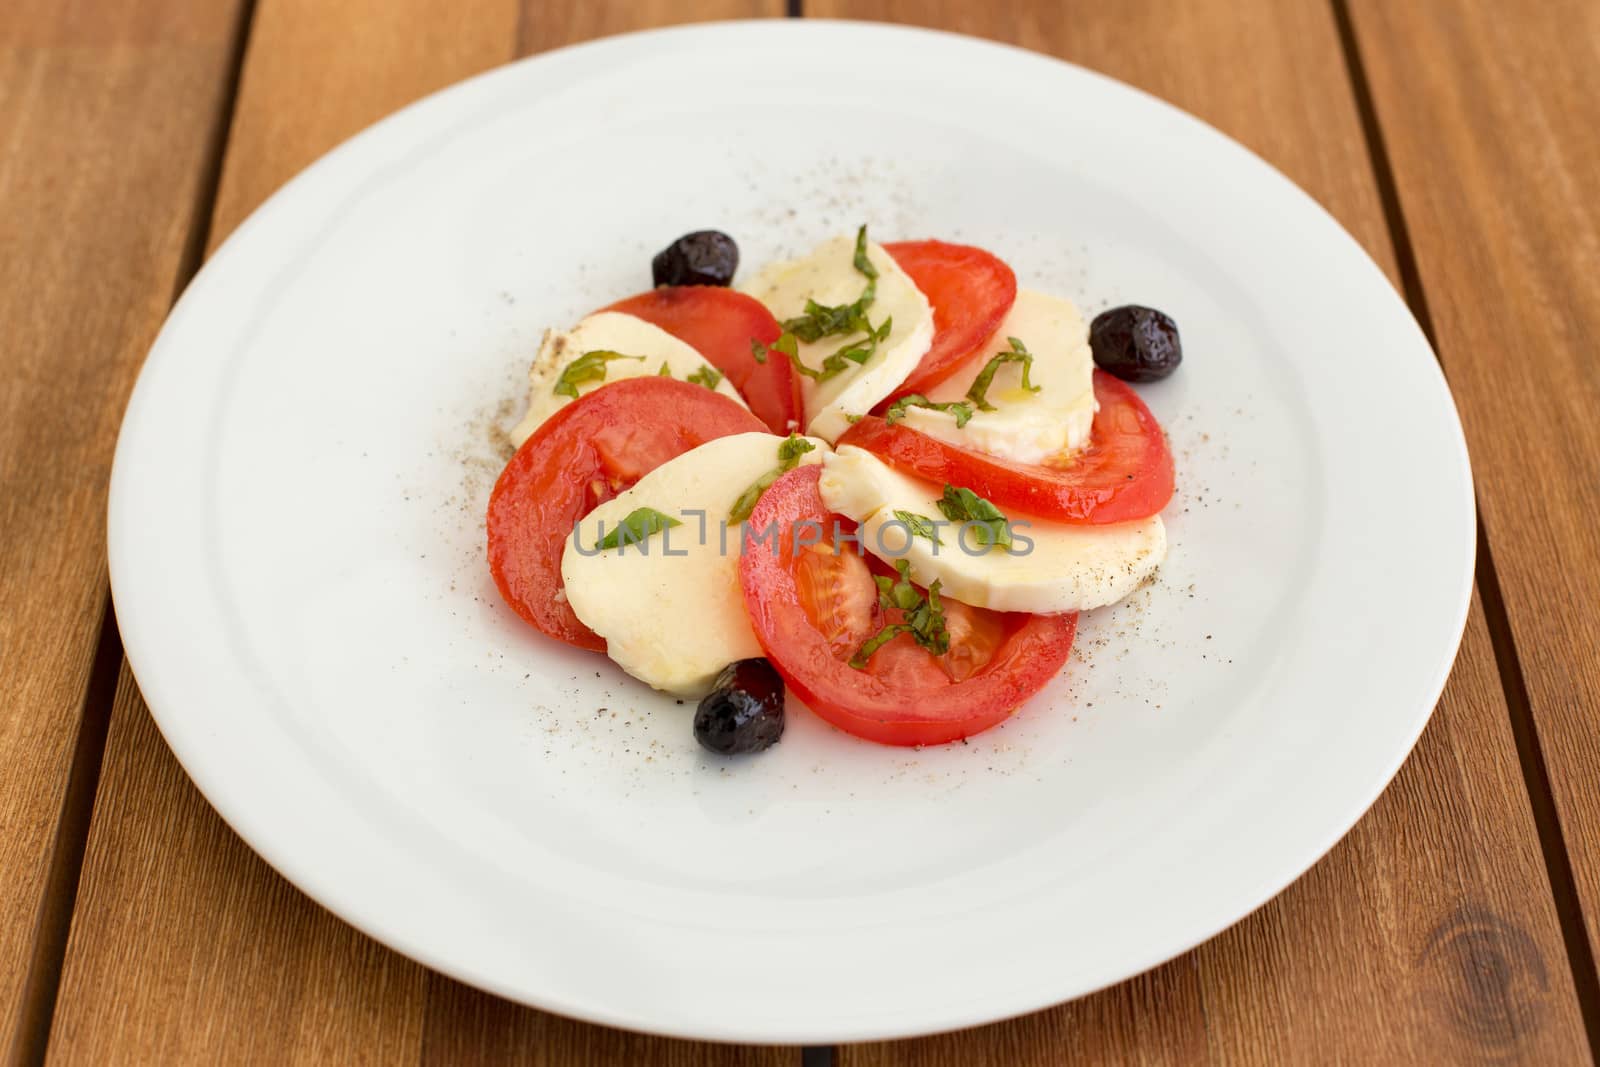 Delicious mozzarella, tomatoes salad in white plate on a wooden table.